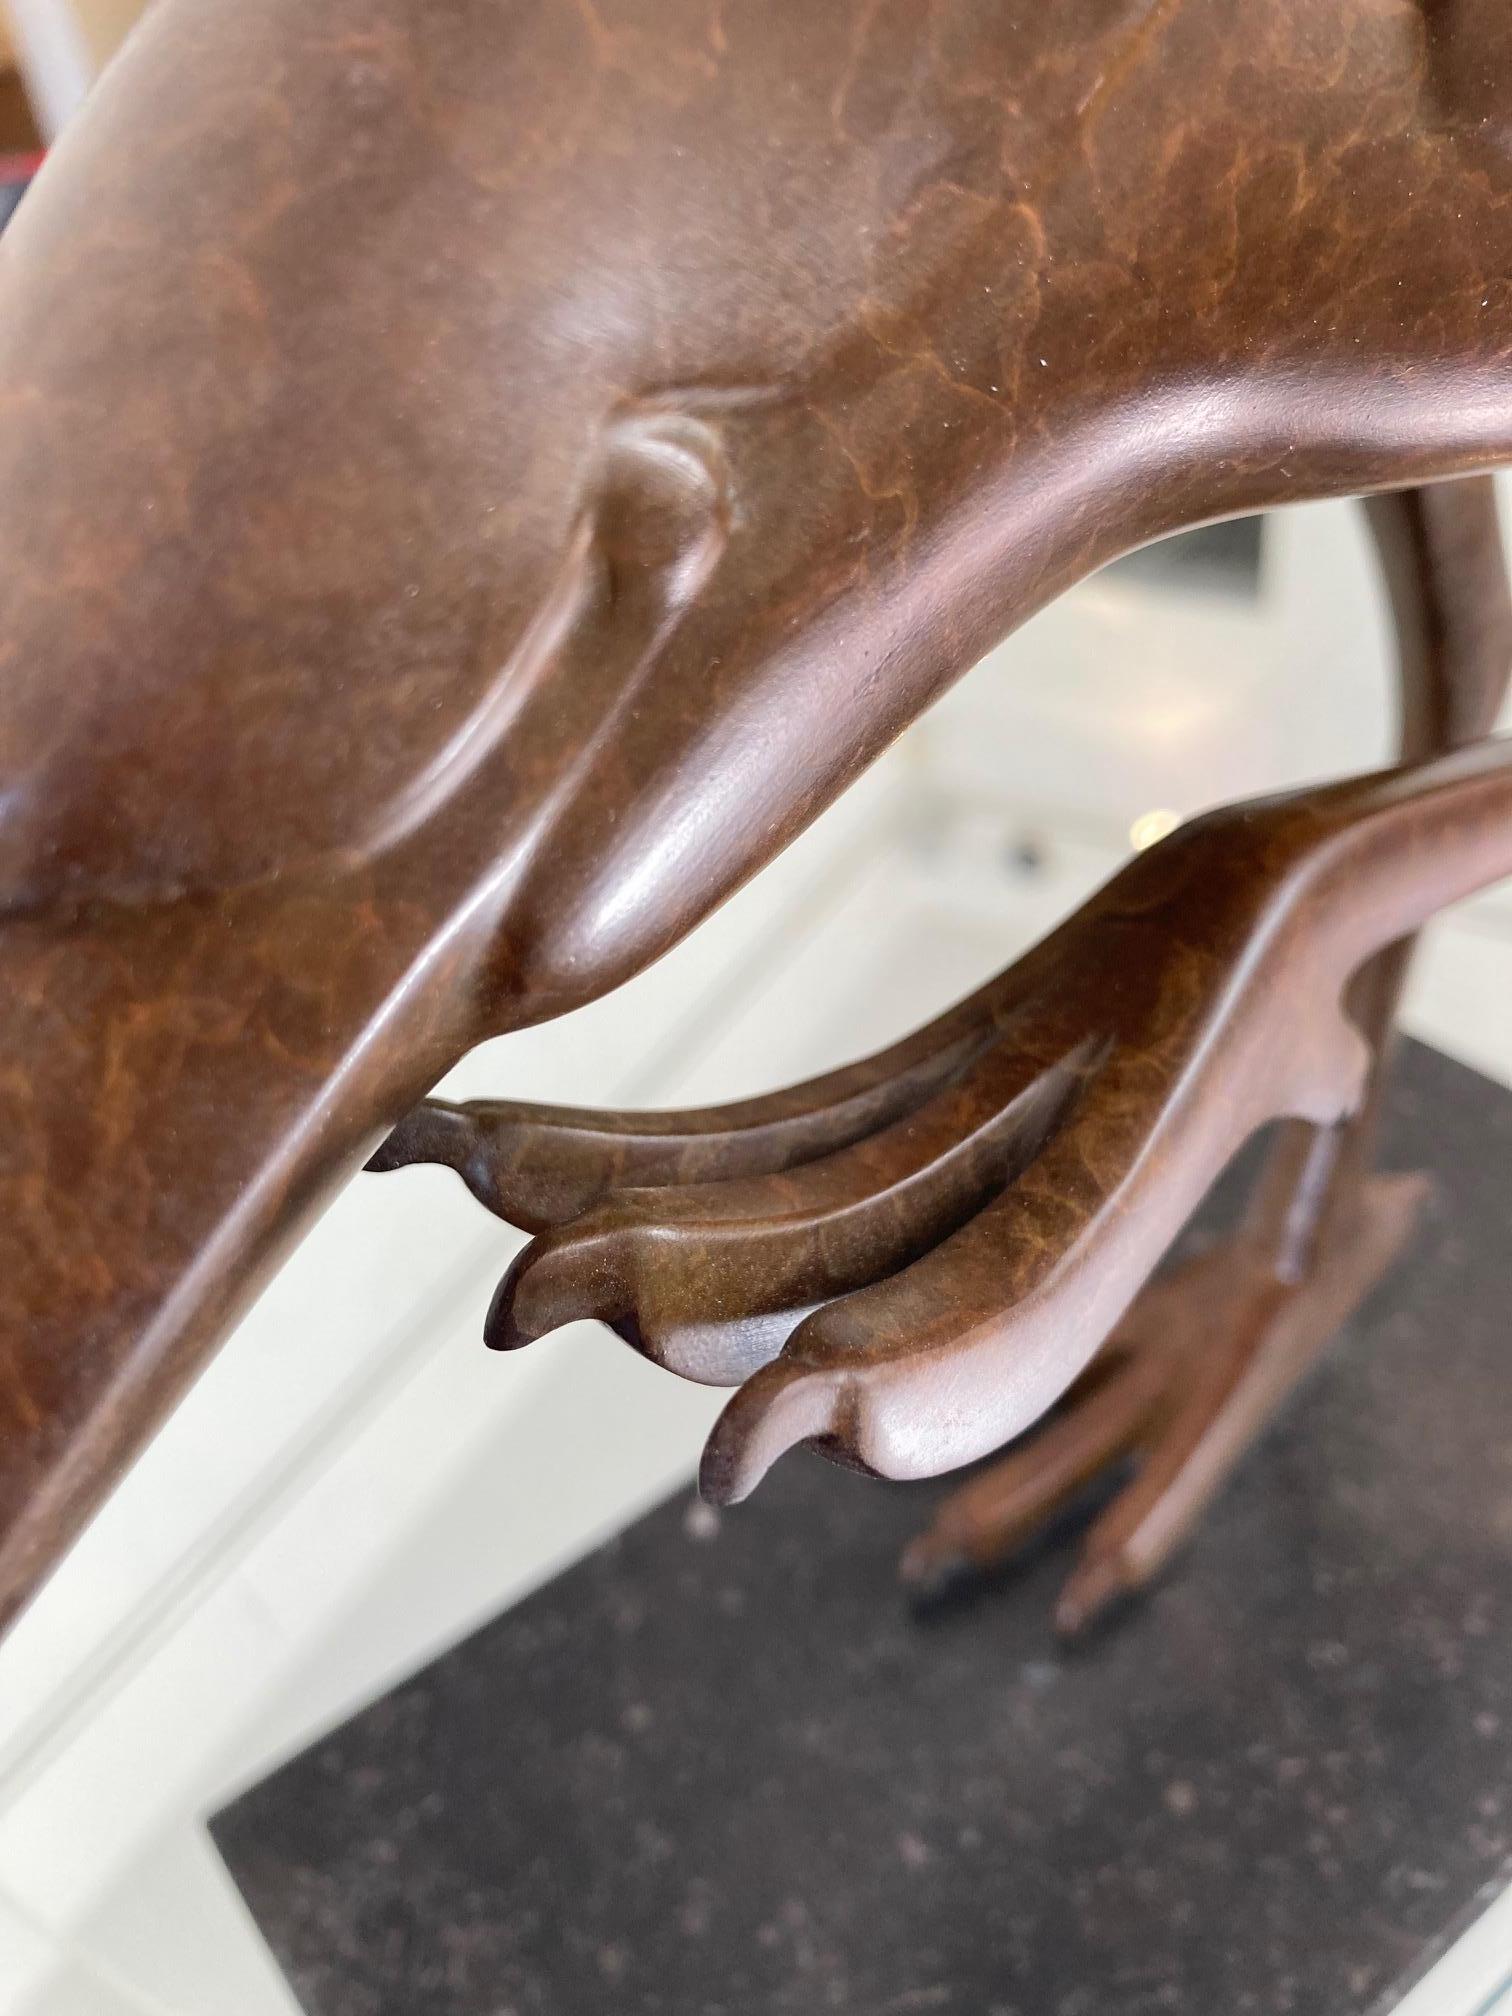 Kwak no. 5 Bird Bronze Sculpture Animal Animalier Brown Patina Nature In Stock - LImited Edition

Evert den Hartog (born in Groot-Ammers, The Netherlands in 1949) followed his education to be a sculptor at the Rotterdam Academy of Visual Arts. In